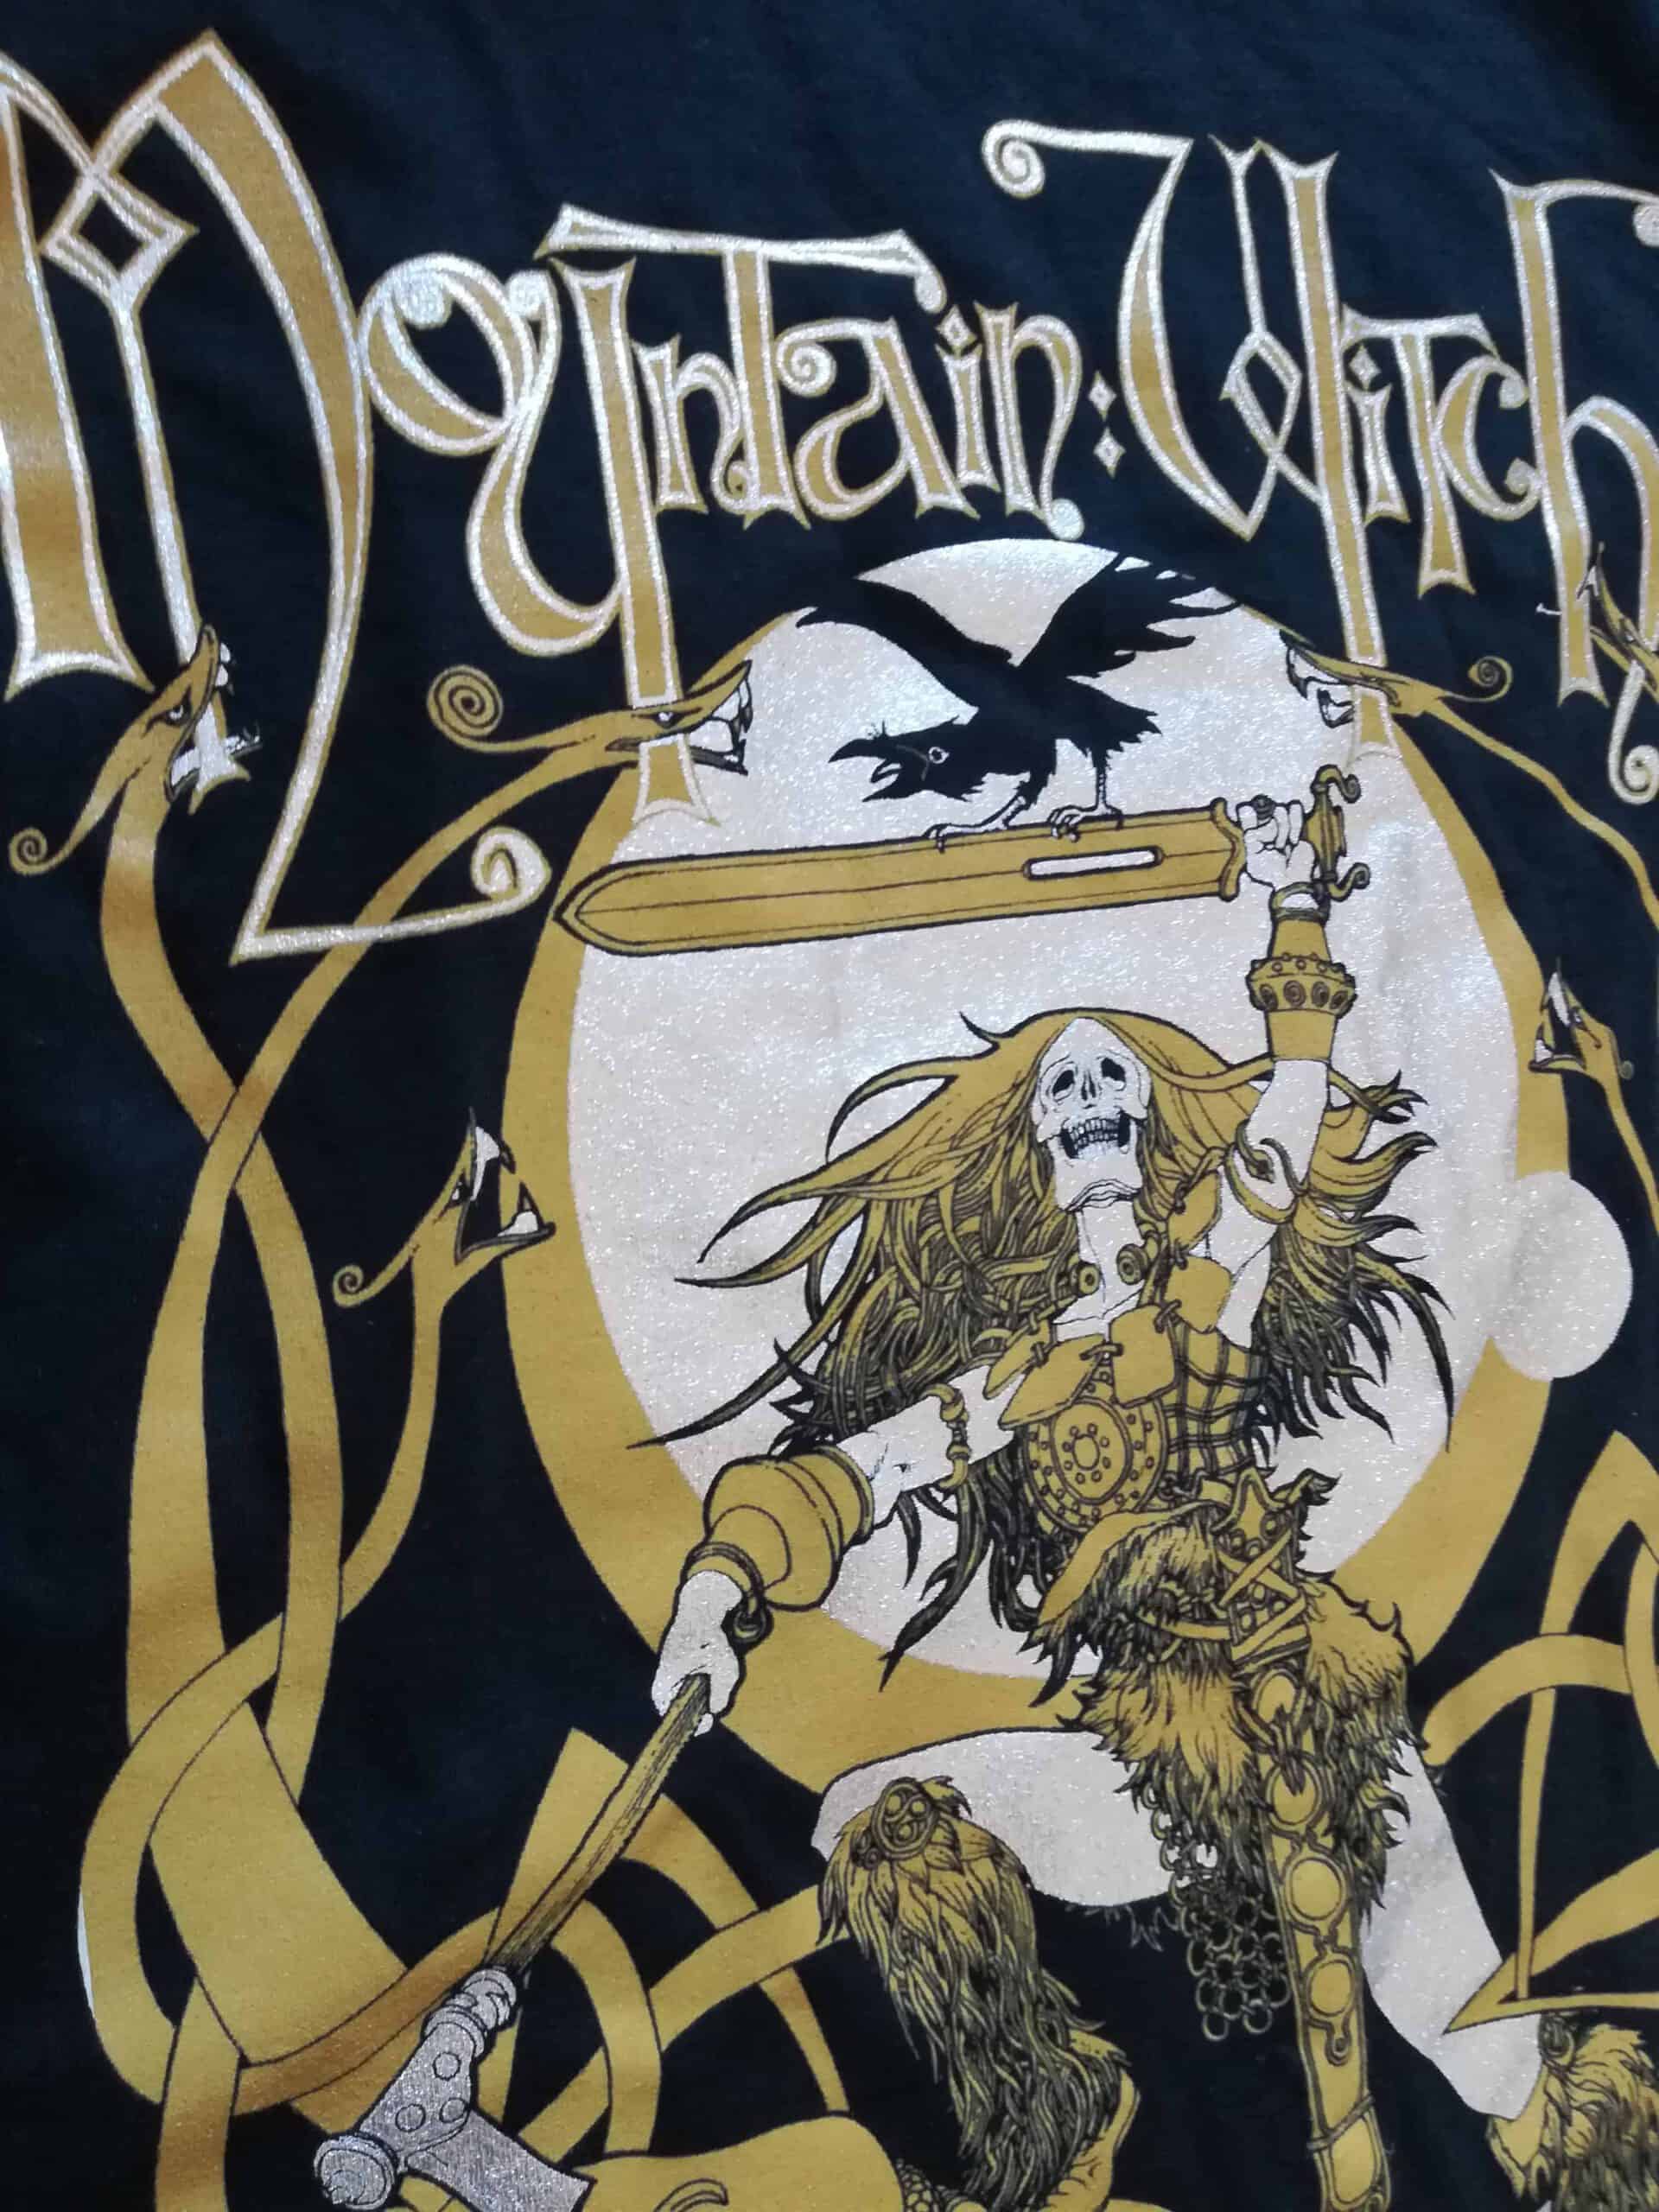 Mountain Witch - Doom Queen Shirt (yellow print) A new and exclusive Mountain Witch shirt! mustard yellow